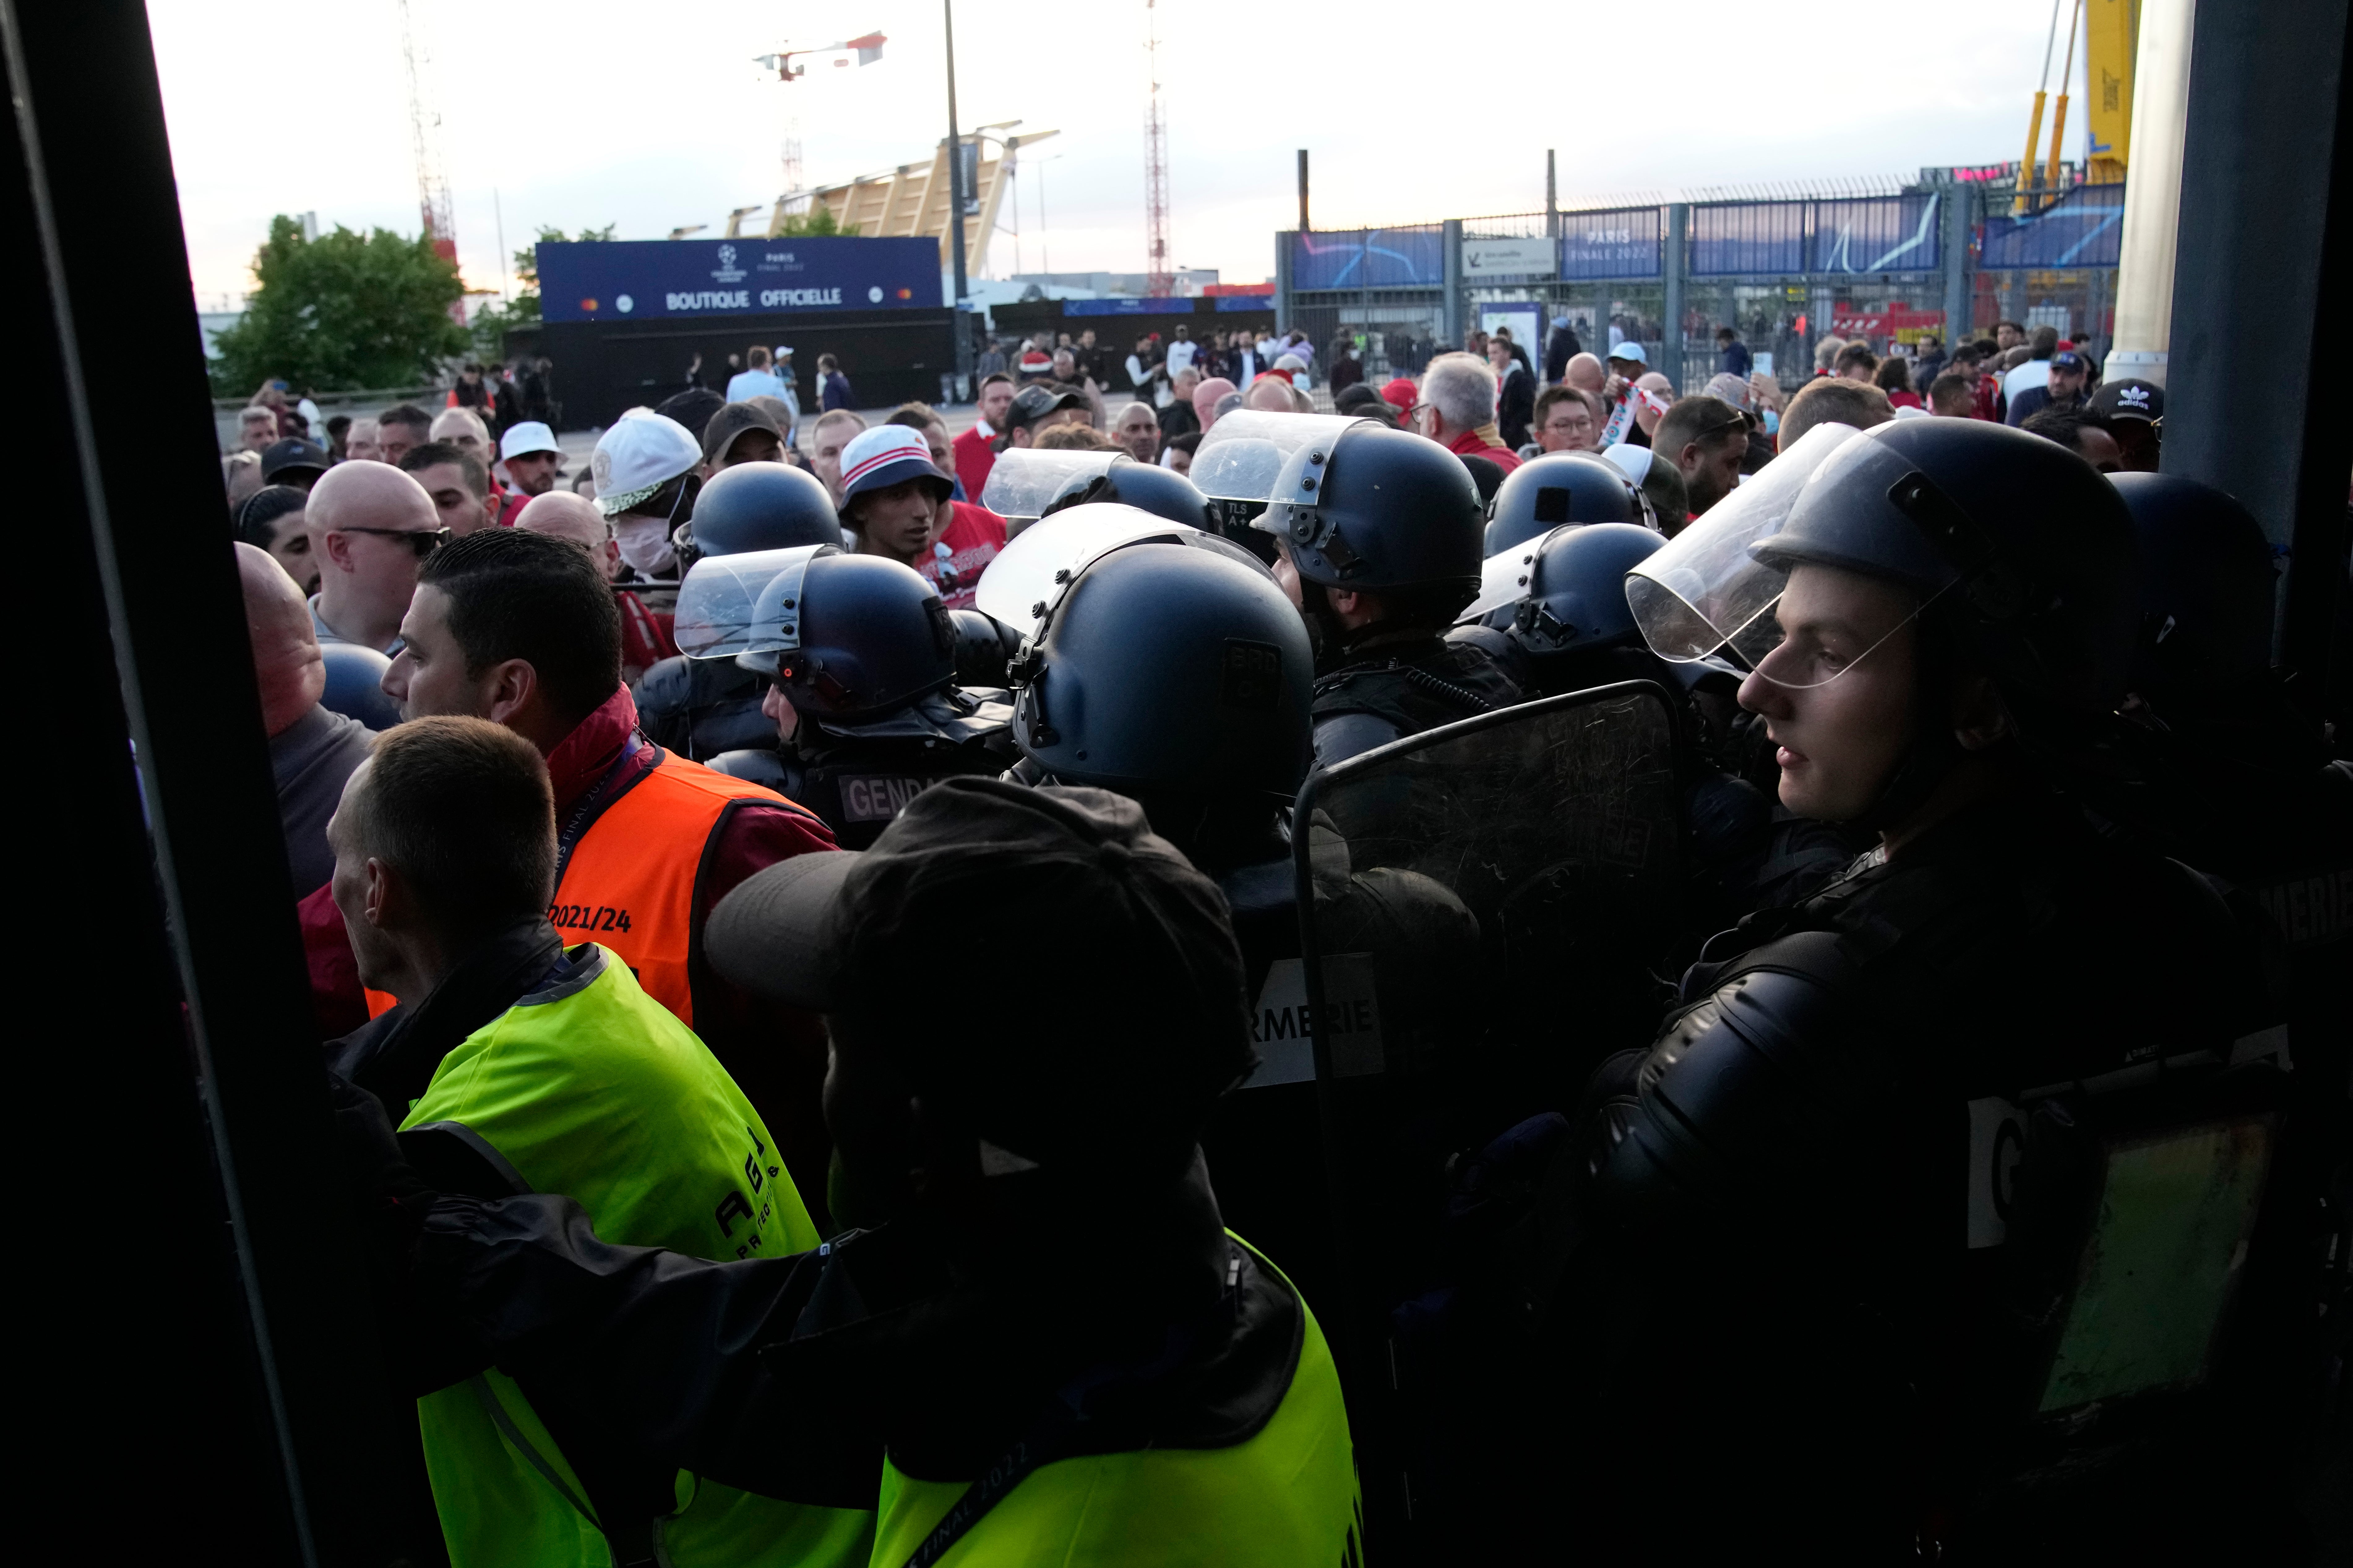 The situation outside the stadium was described as ‘a shambles’